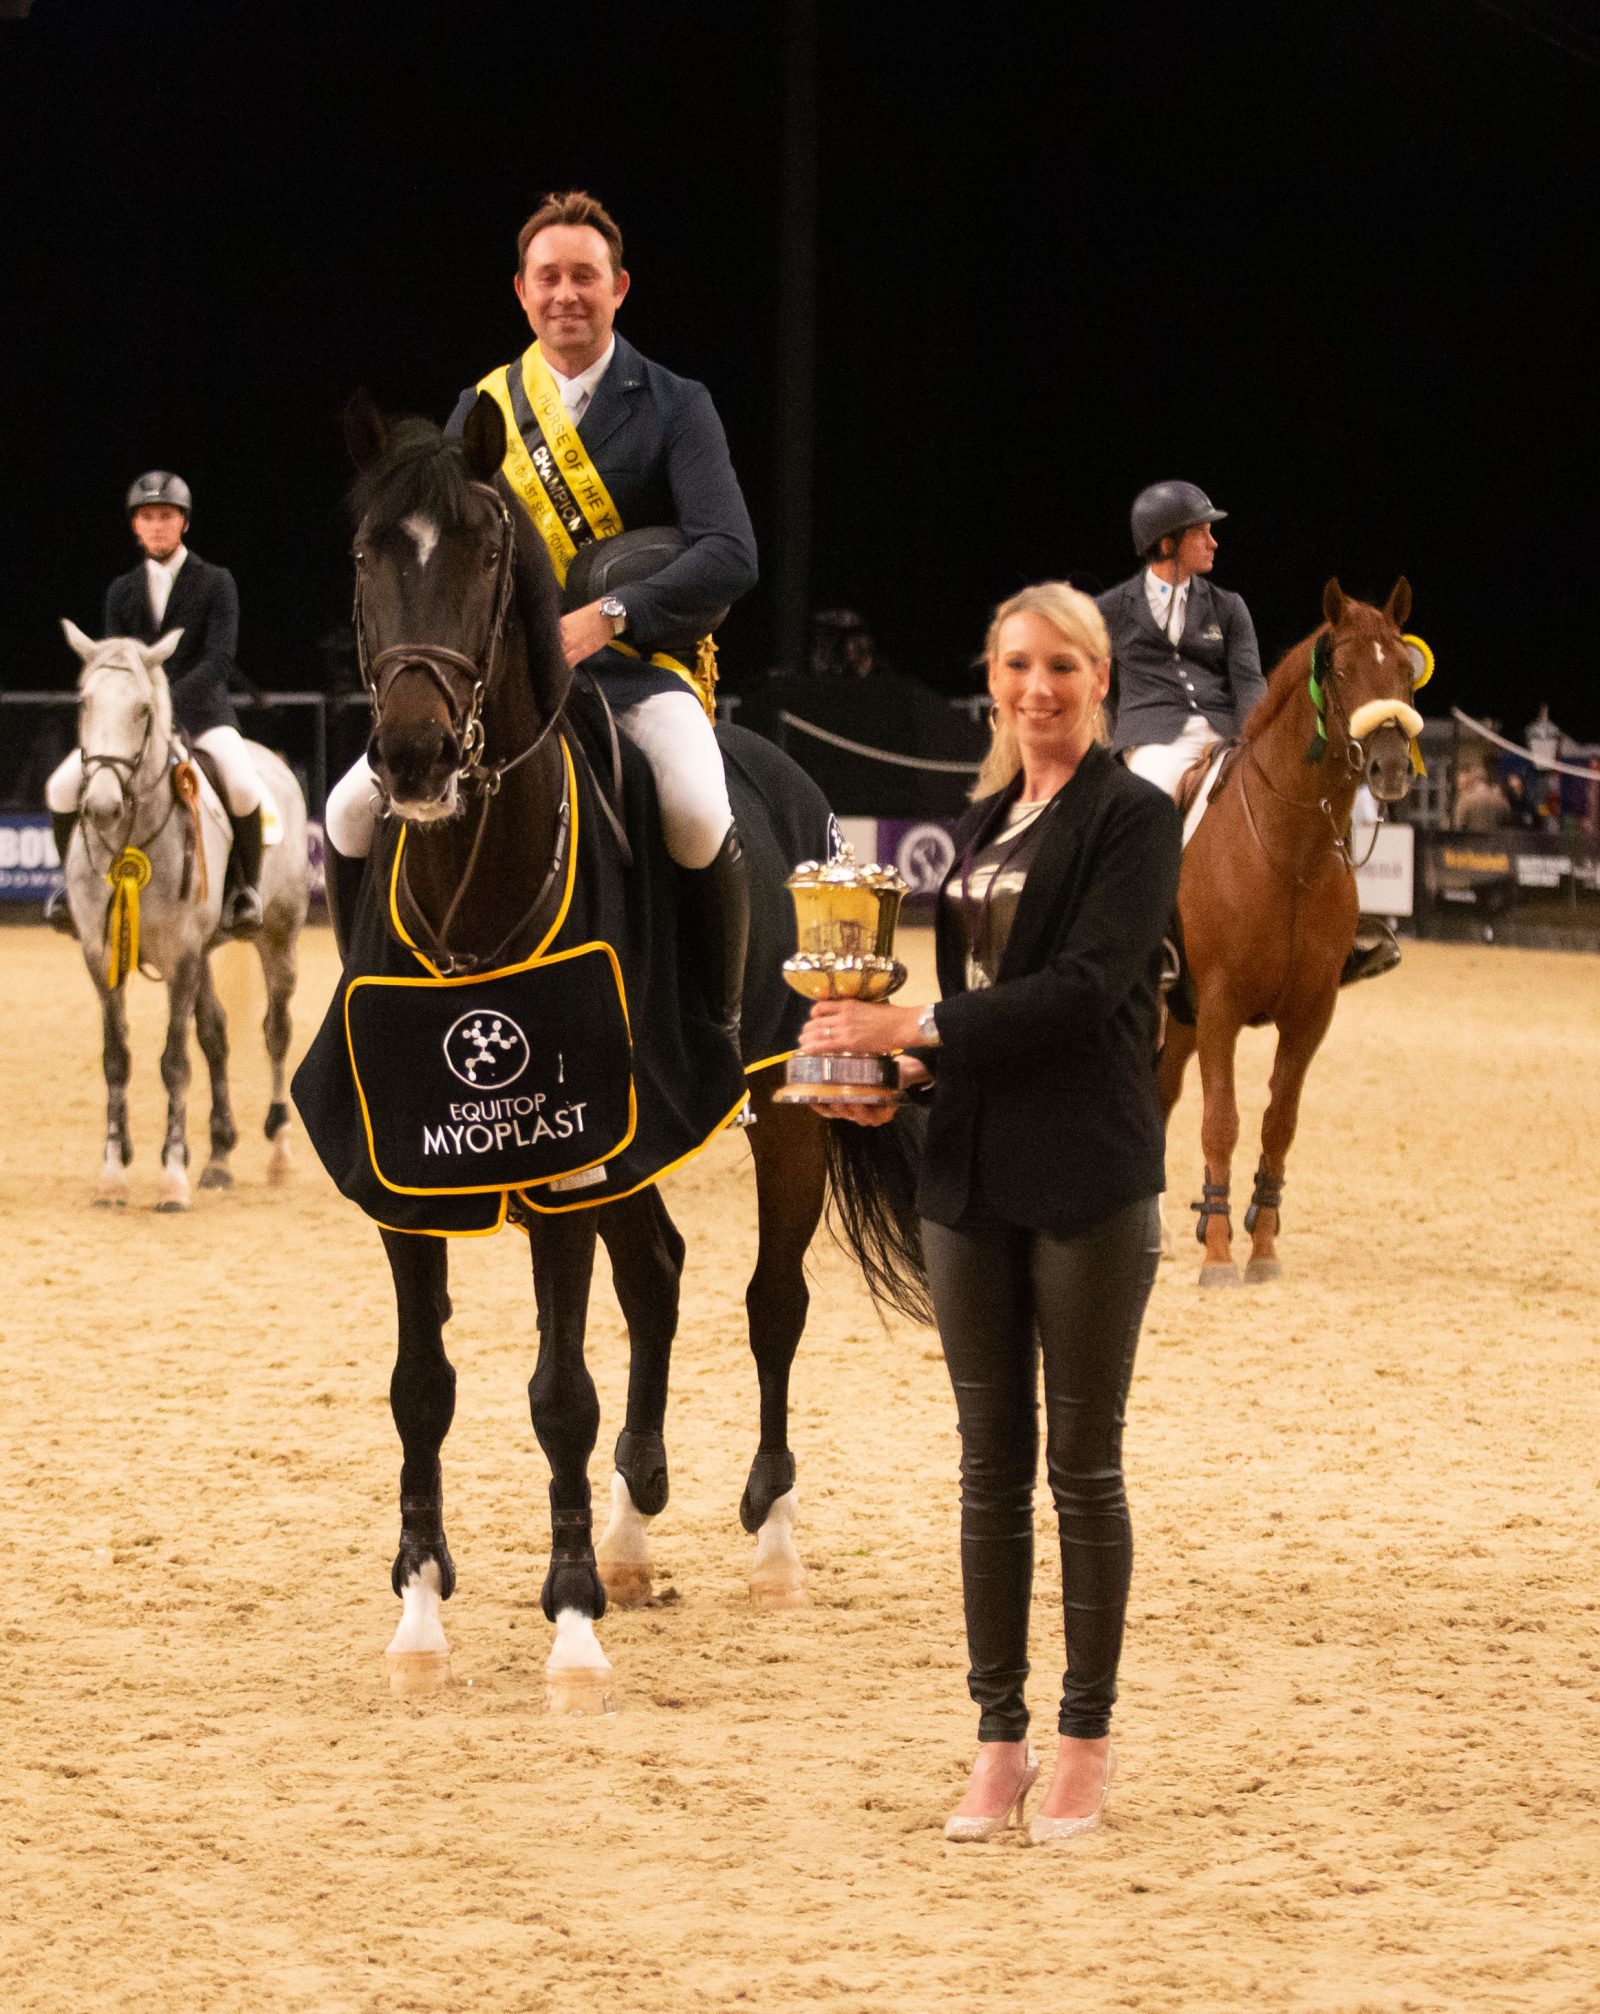 Hoys: A new champion crowned in the Equitop Myoplast Senior Foxhunter Championship